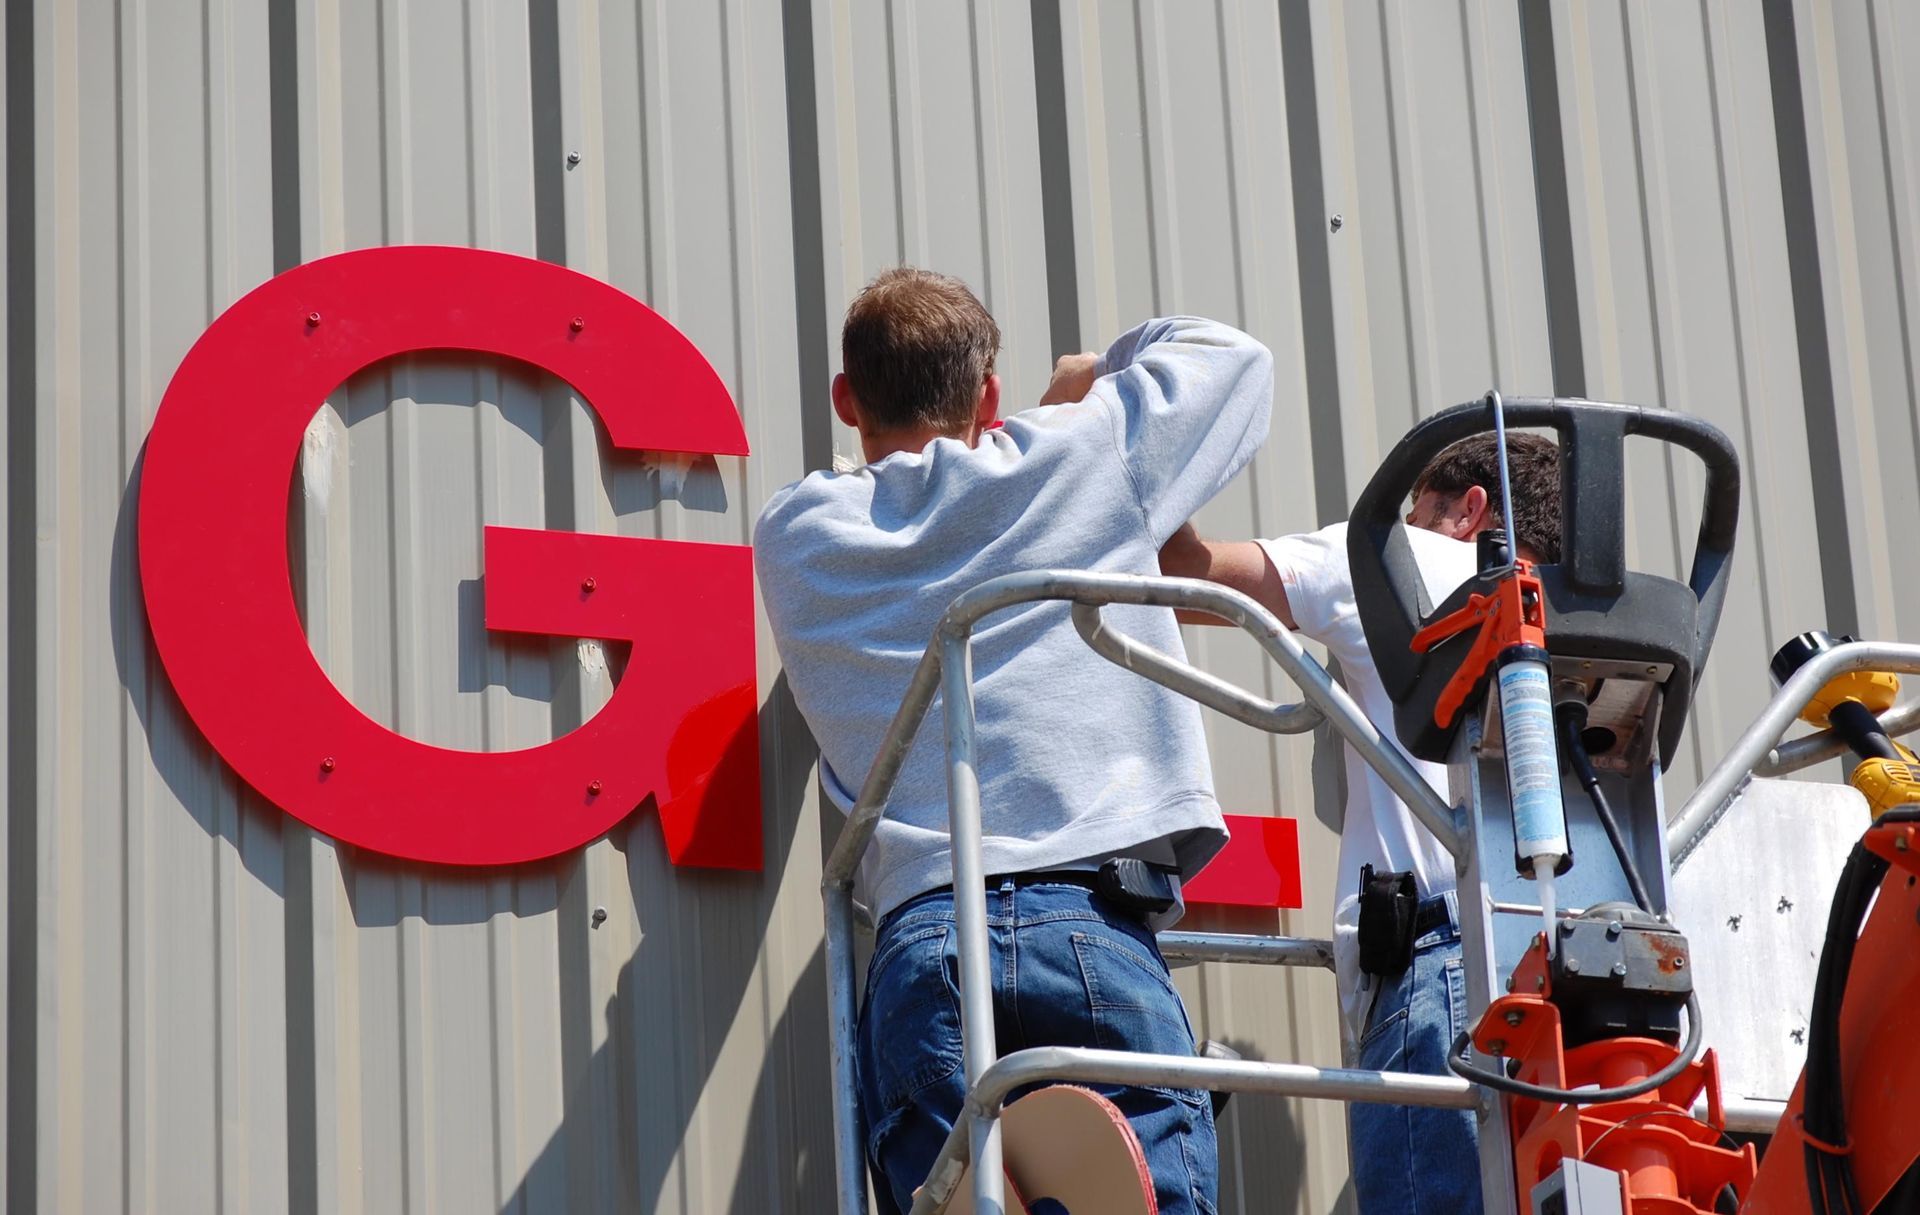 a man is installing a large red letter g on the side of a building .